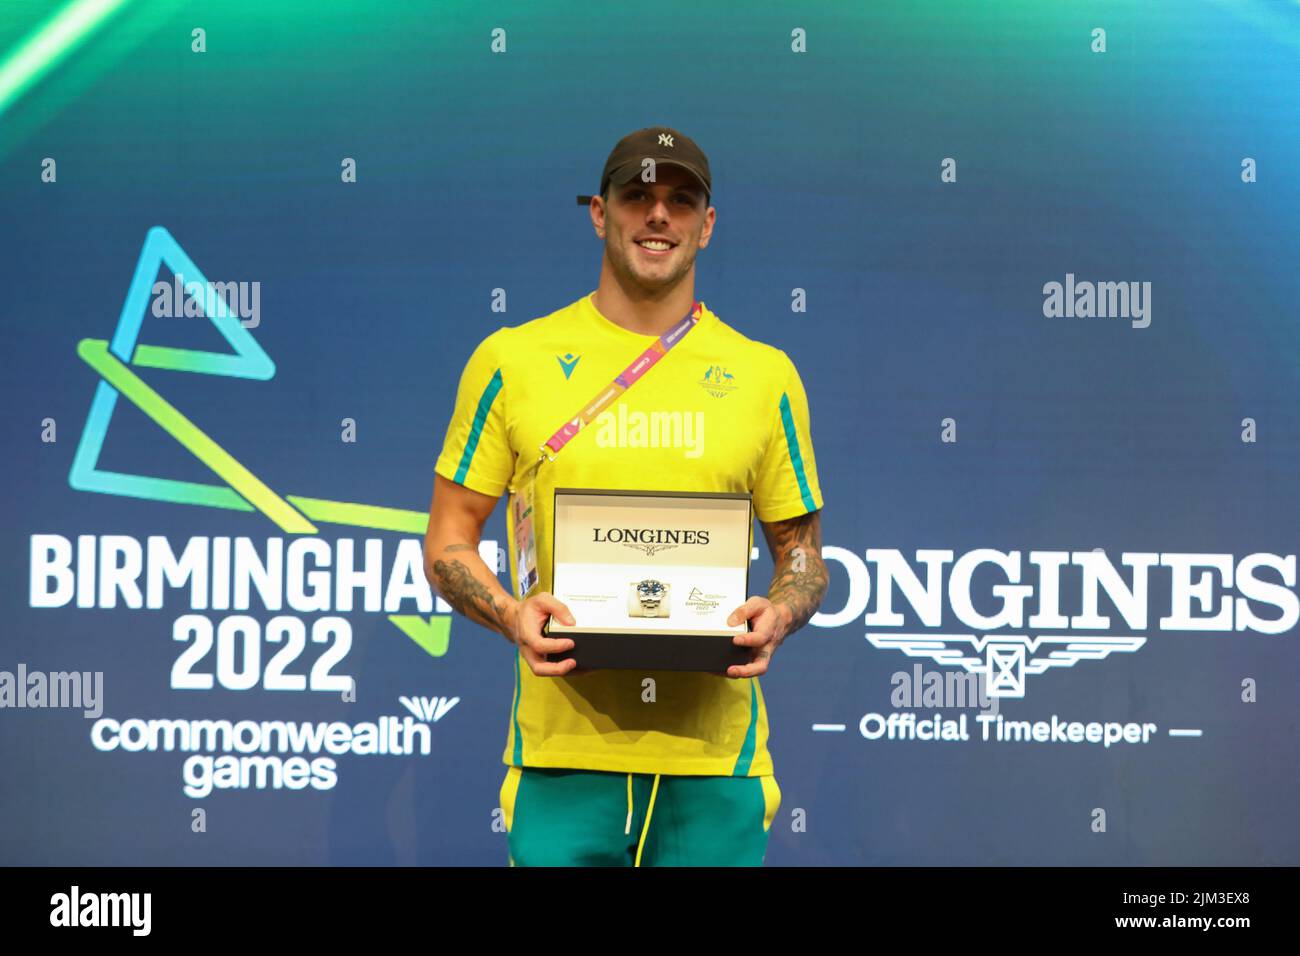 August 4, 2022, Birmingham, West Midlands, England: Australian swimmer KYLE CHALMERS attends the Longines Commonwealth Games record breakers celebration during the Birmingham 2022 Commonwealth Games (Credit Image: © Mickael Chavet/ZUMA Press Wire) Stock Photo